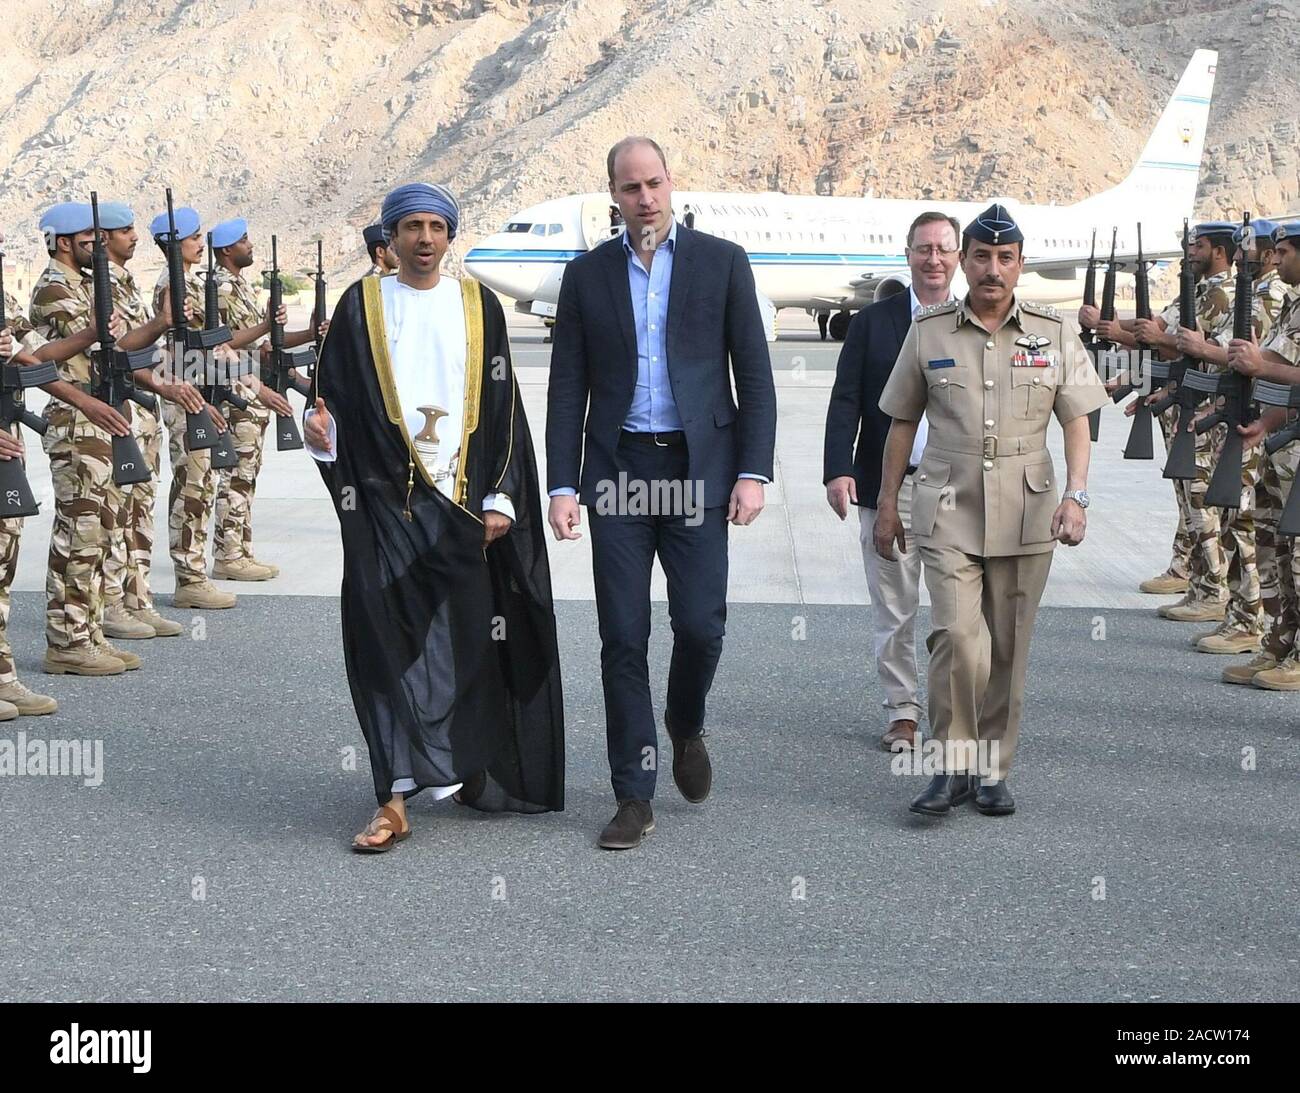 The Duke of Cambridge (centre) arrives at Khasab Airport, Oman, as part of his tour of Kuwait and Oman. PA Photo. Picture date: Tuesday December 3, 2019. See PA story ROYAL Tour. Photo credit should read: Tim Rooke/PA Wire Stock Photo